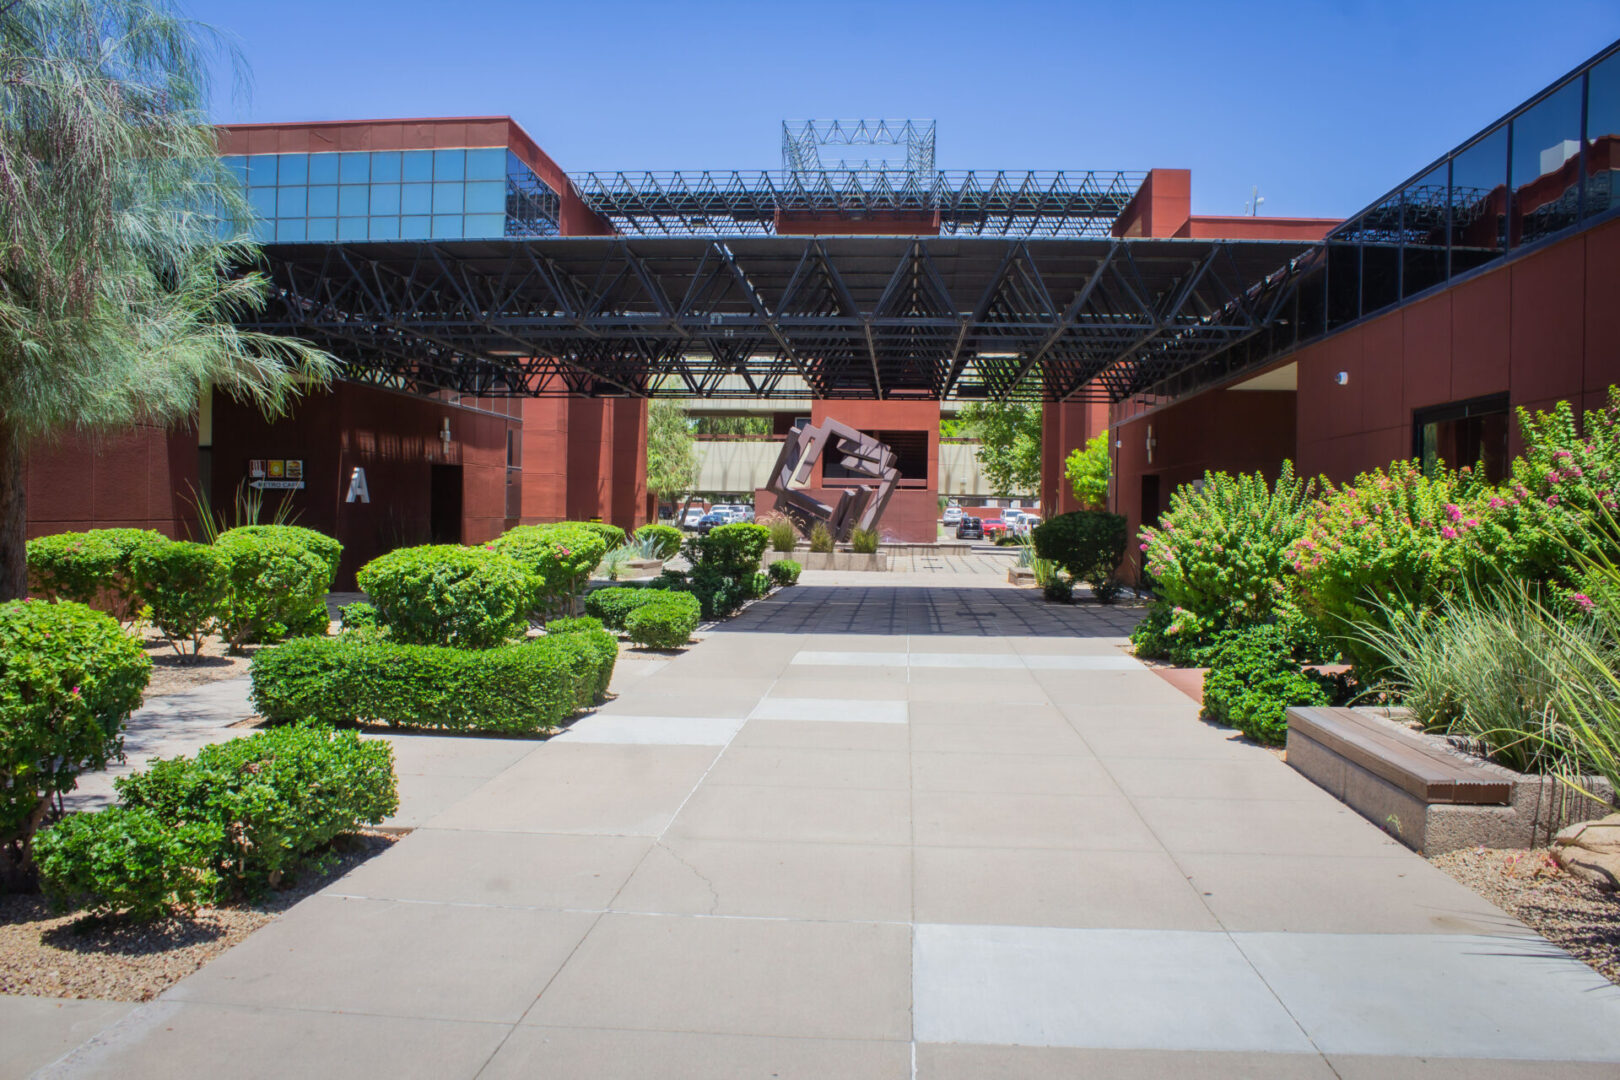 The entrance walkway to the office building